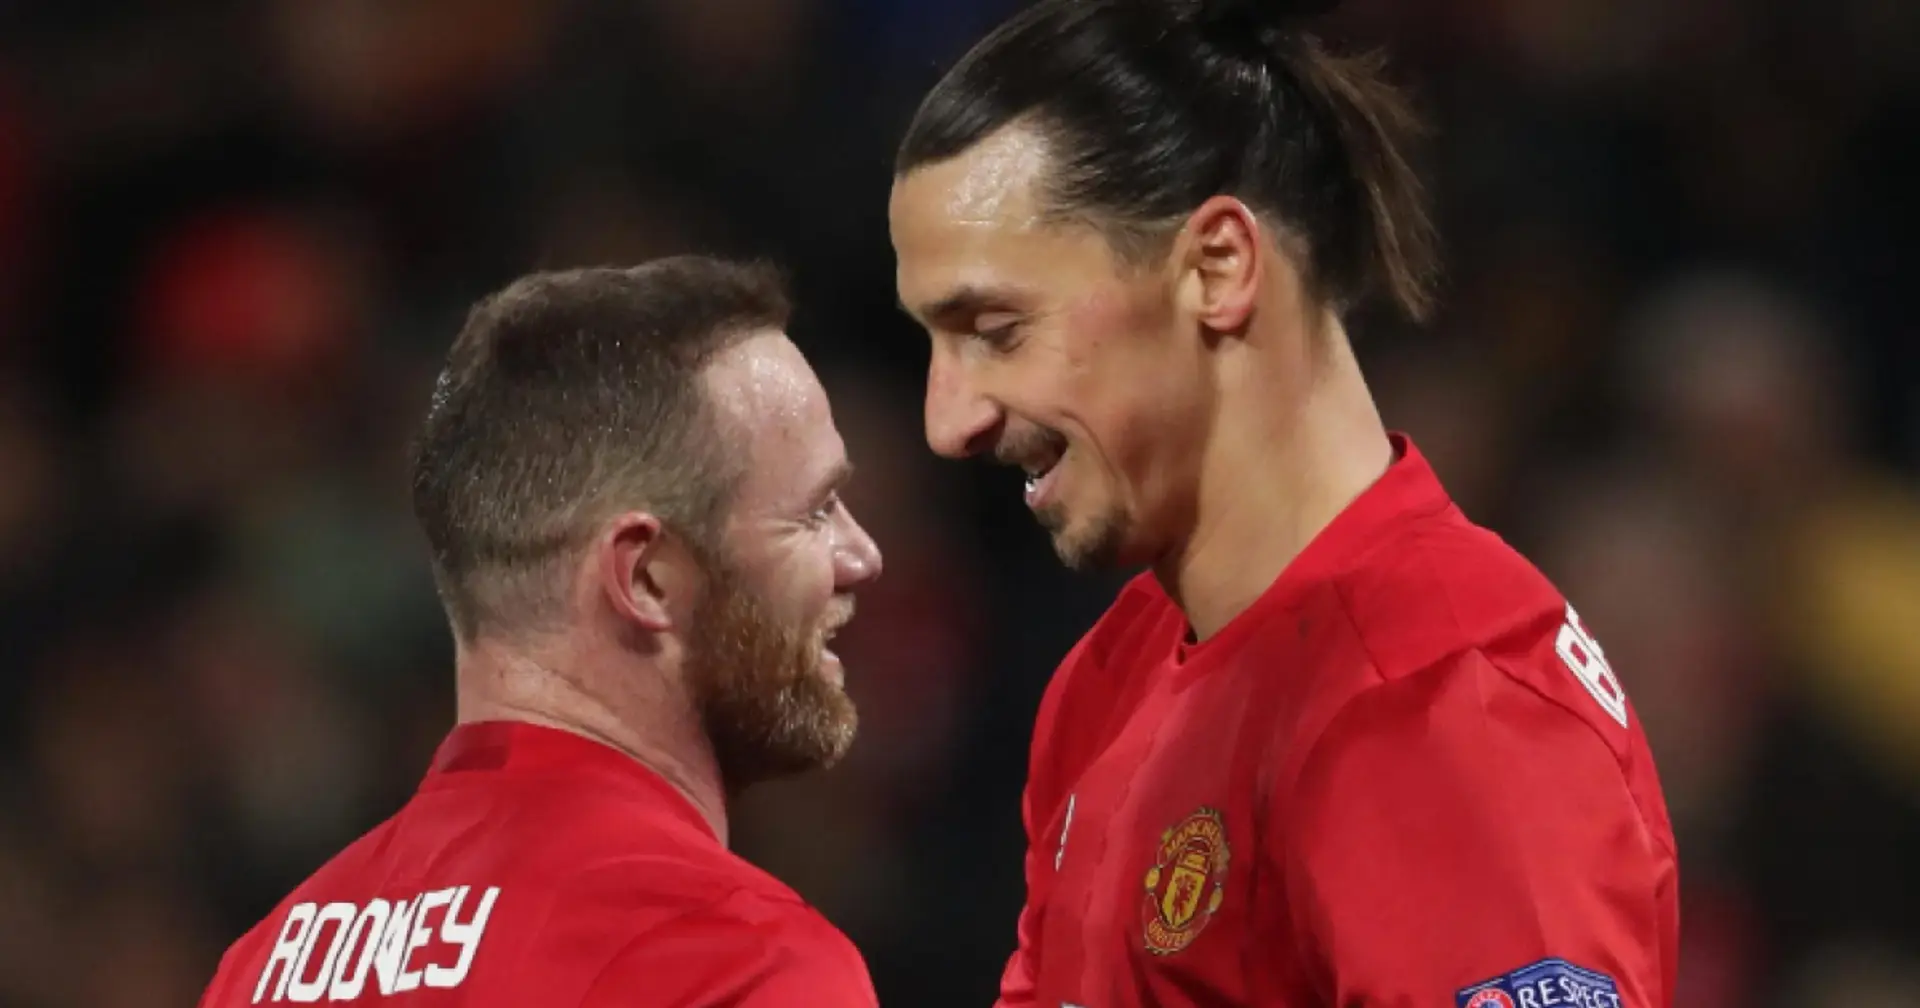 'Make Rooney versus Ibrahimovic': Former boxer wants to see a fight between legendary strikers 